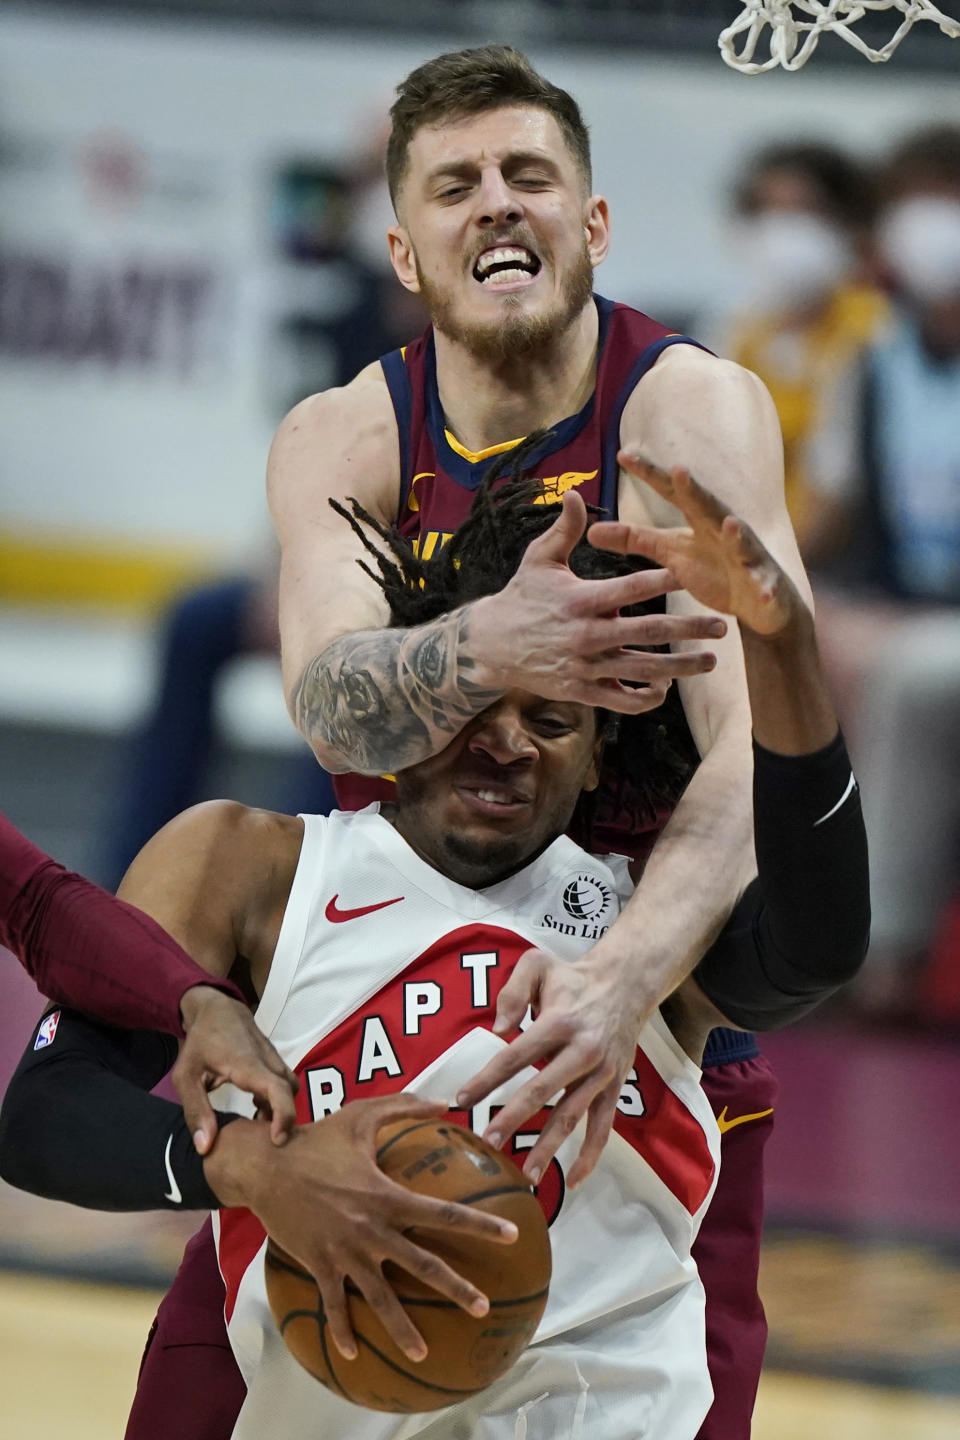 Cleveland Cavaliers Isaiah Hartenstein, top, knocks the ball loose from Toronto Raptors' Freddie Gillespie in the first half of an NBA basketball game, Saturday, April 10, 2021, in Cleveland. (AP Photo/Tony Dejak)